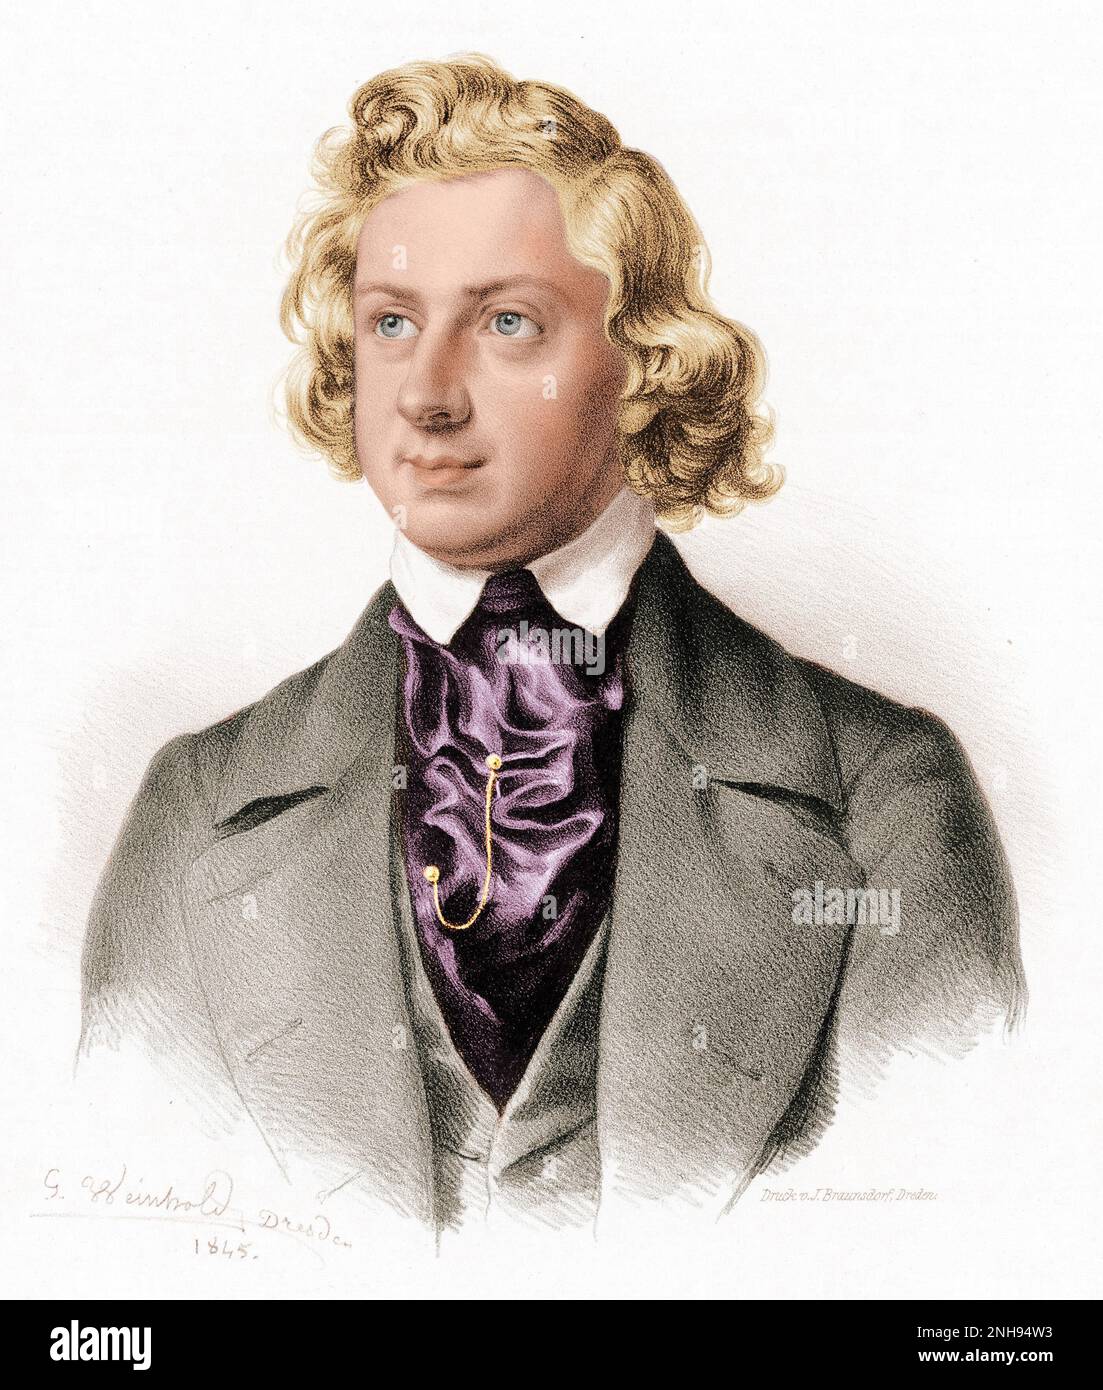 Niels Wilhelm Gade (1817-1890) was a Danish composer, conductor, violinist, and organist. Engraving by Johann Georg Weinhold (1813-1880) from 1845. Colorized. Stock Photo